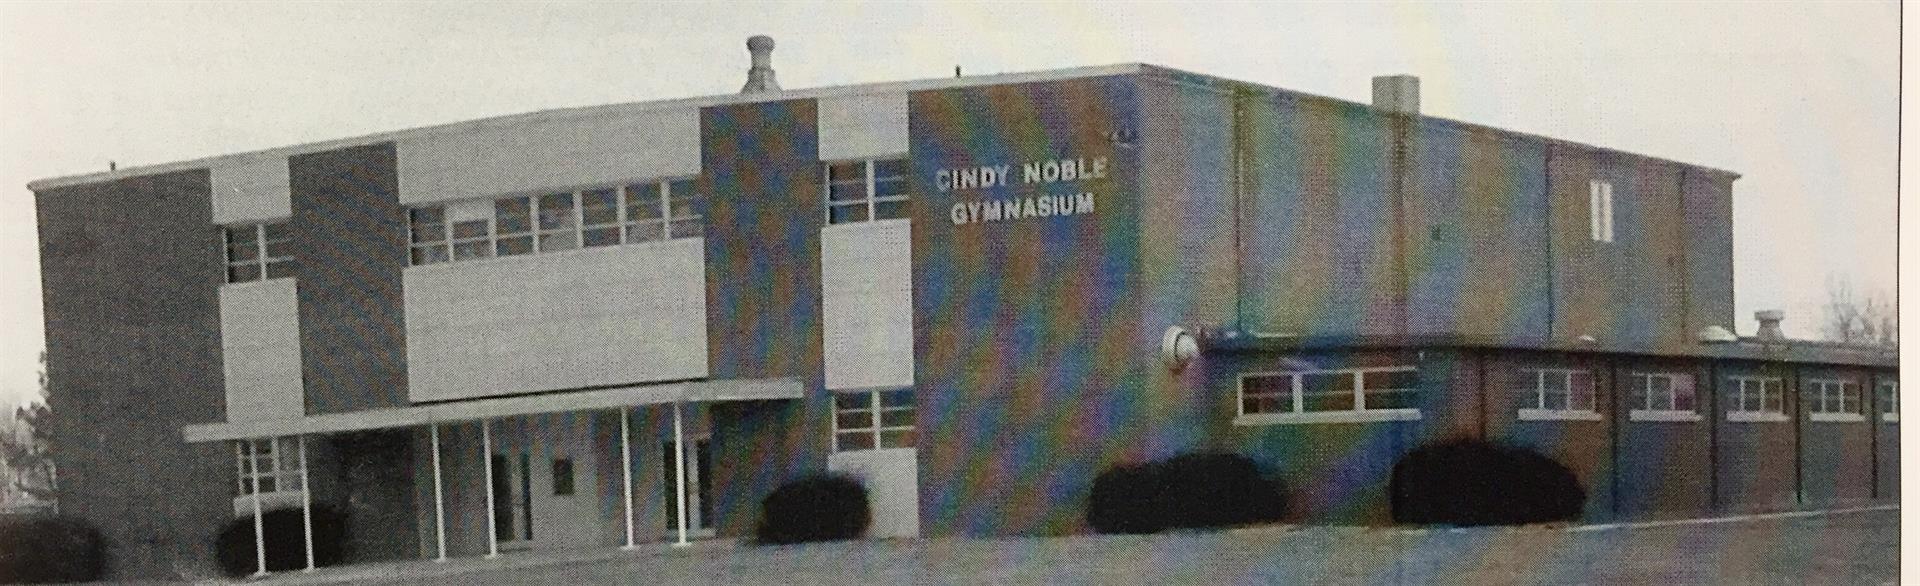 Photo of the Cindy Noble Gymnasium.